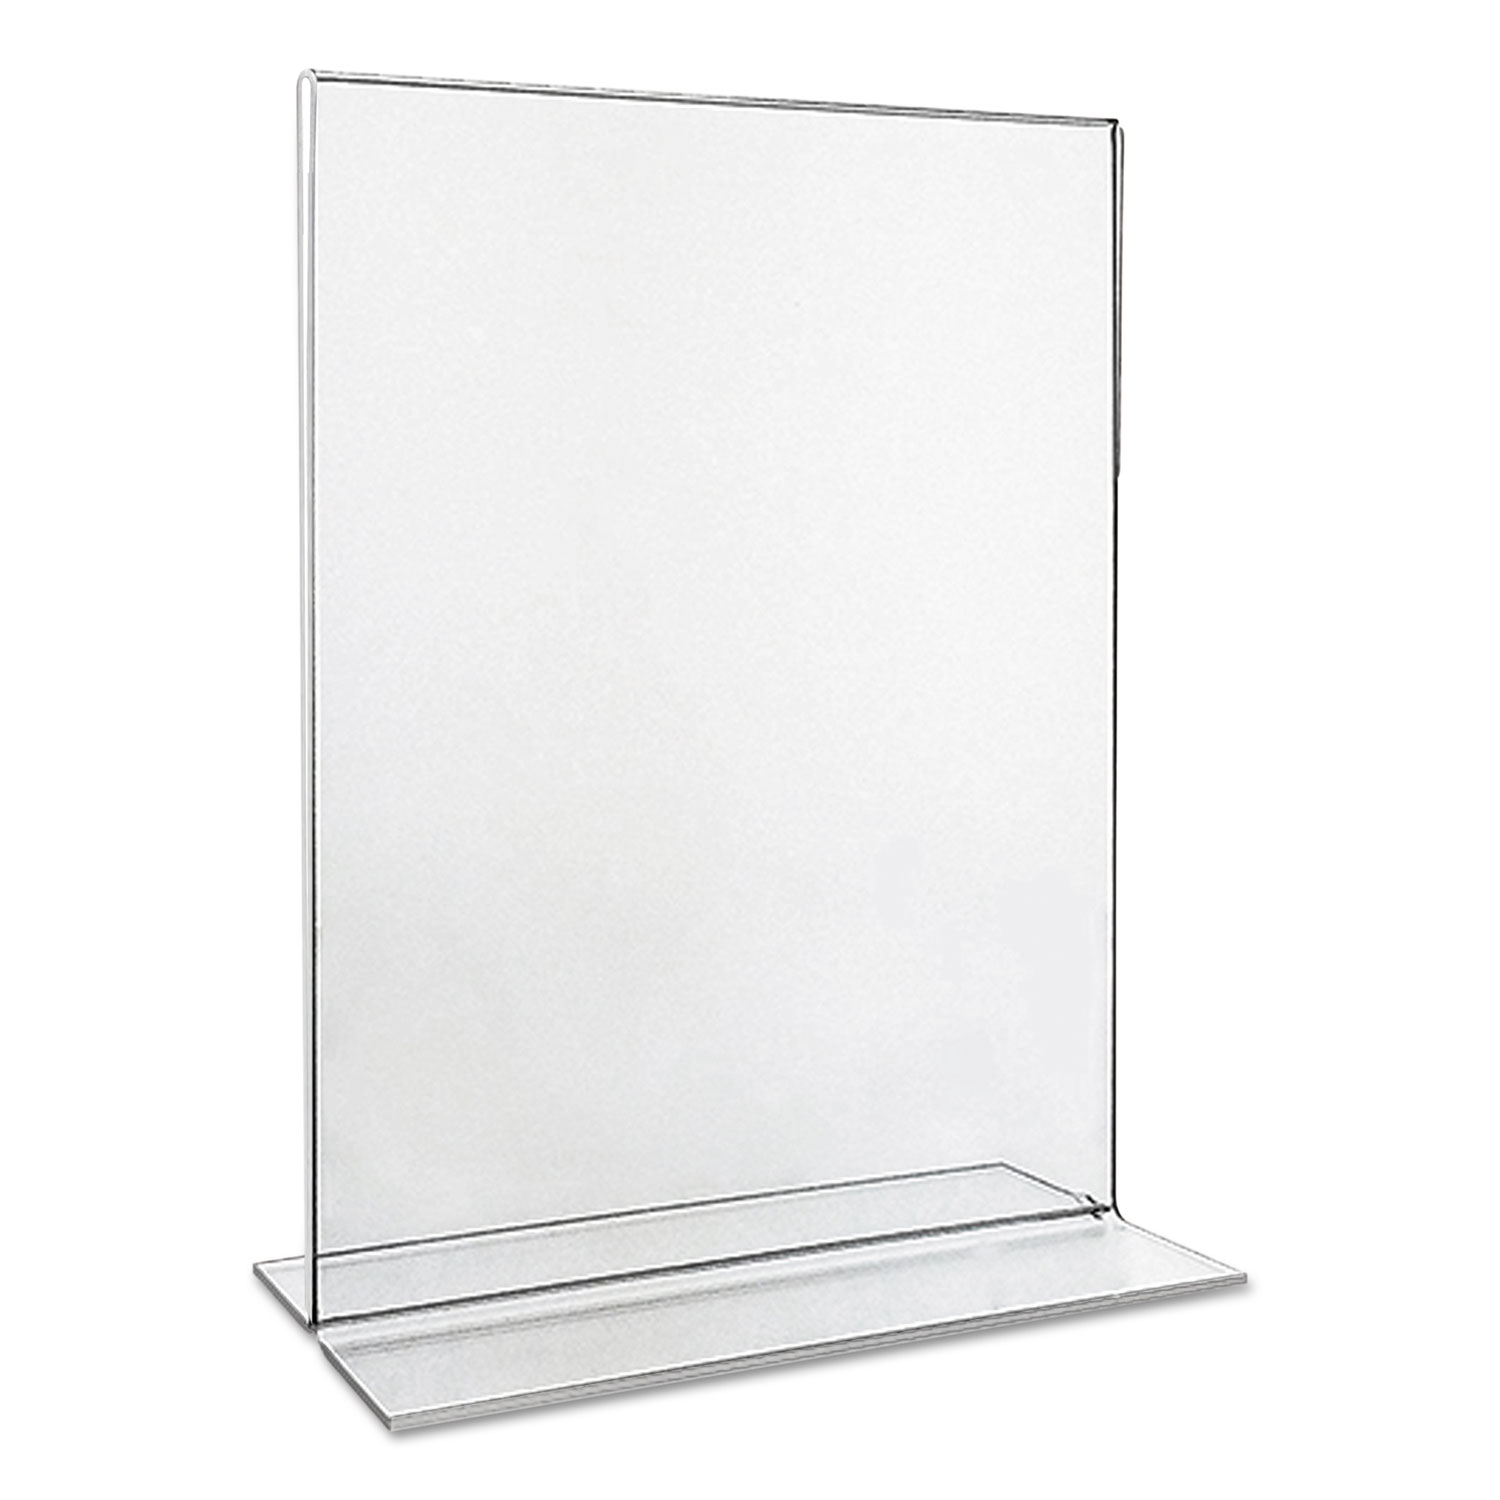 2-Sided Sign Holder, 8 1/2 x 11, Clear